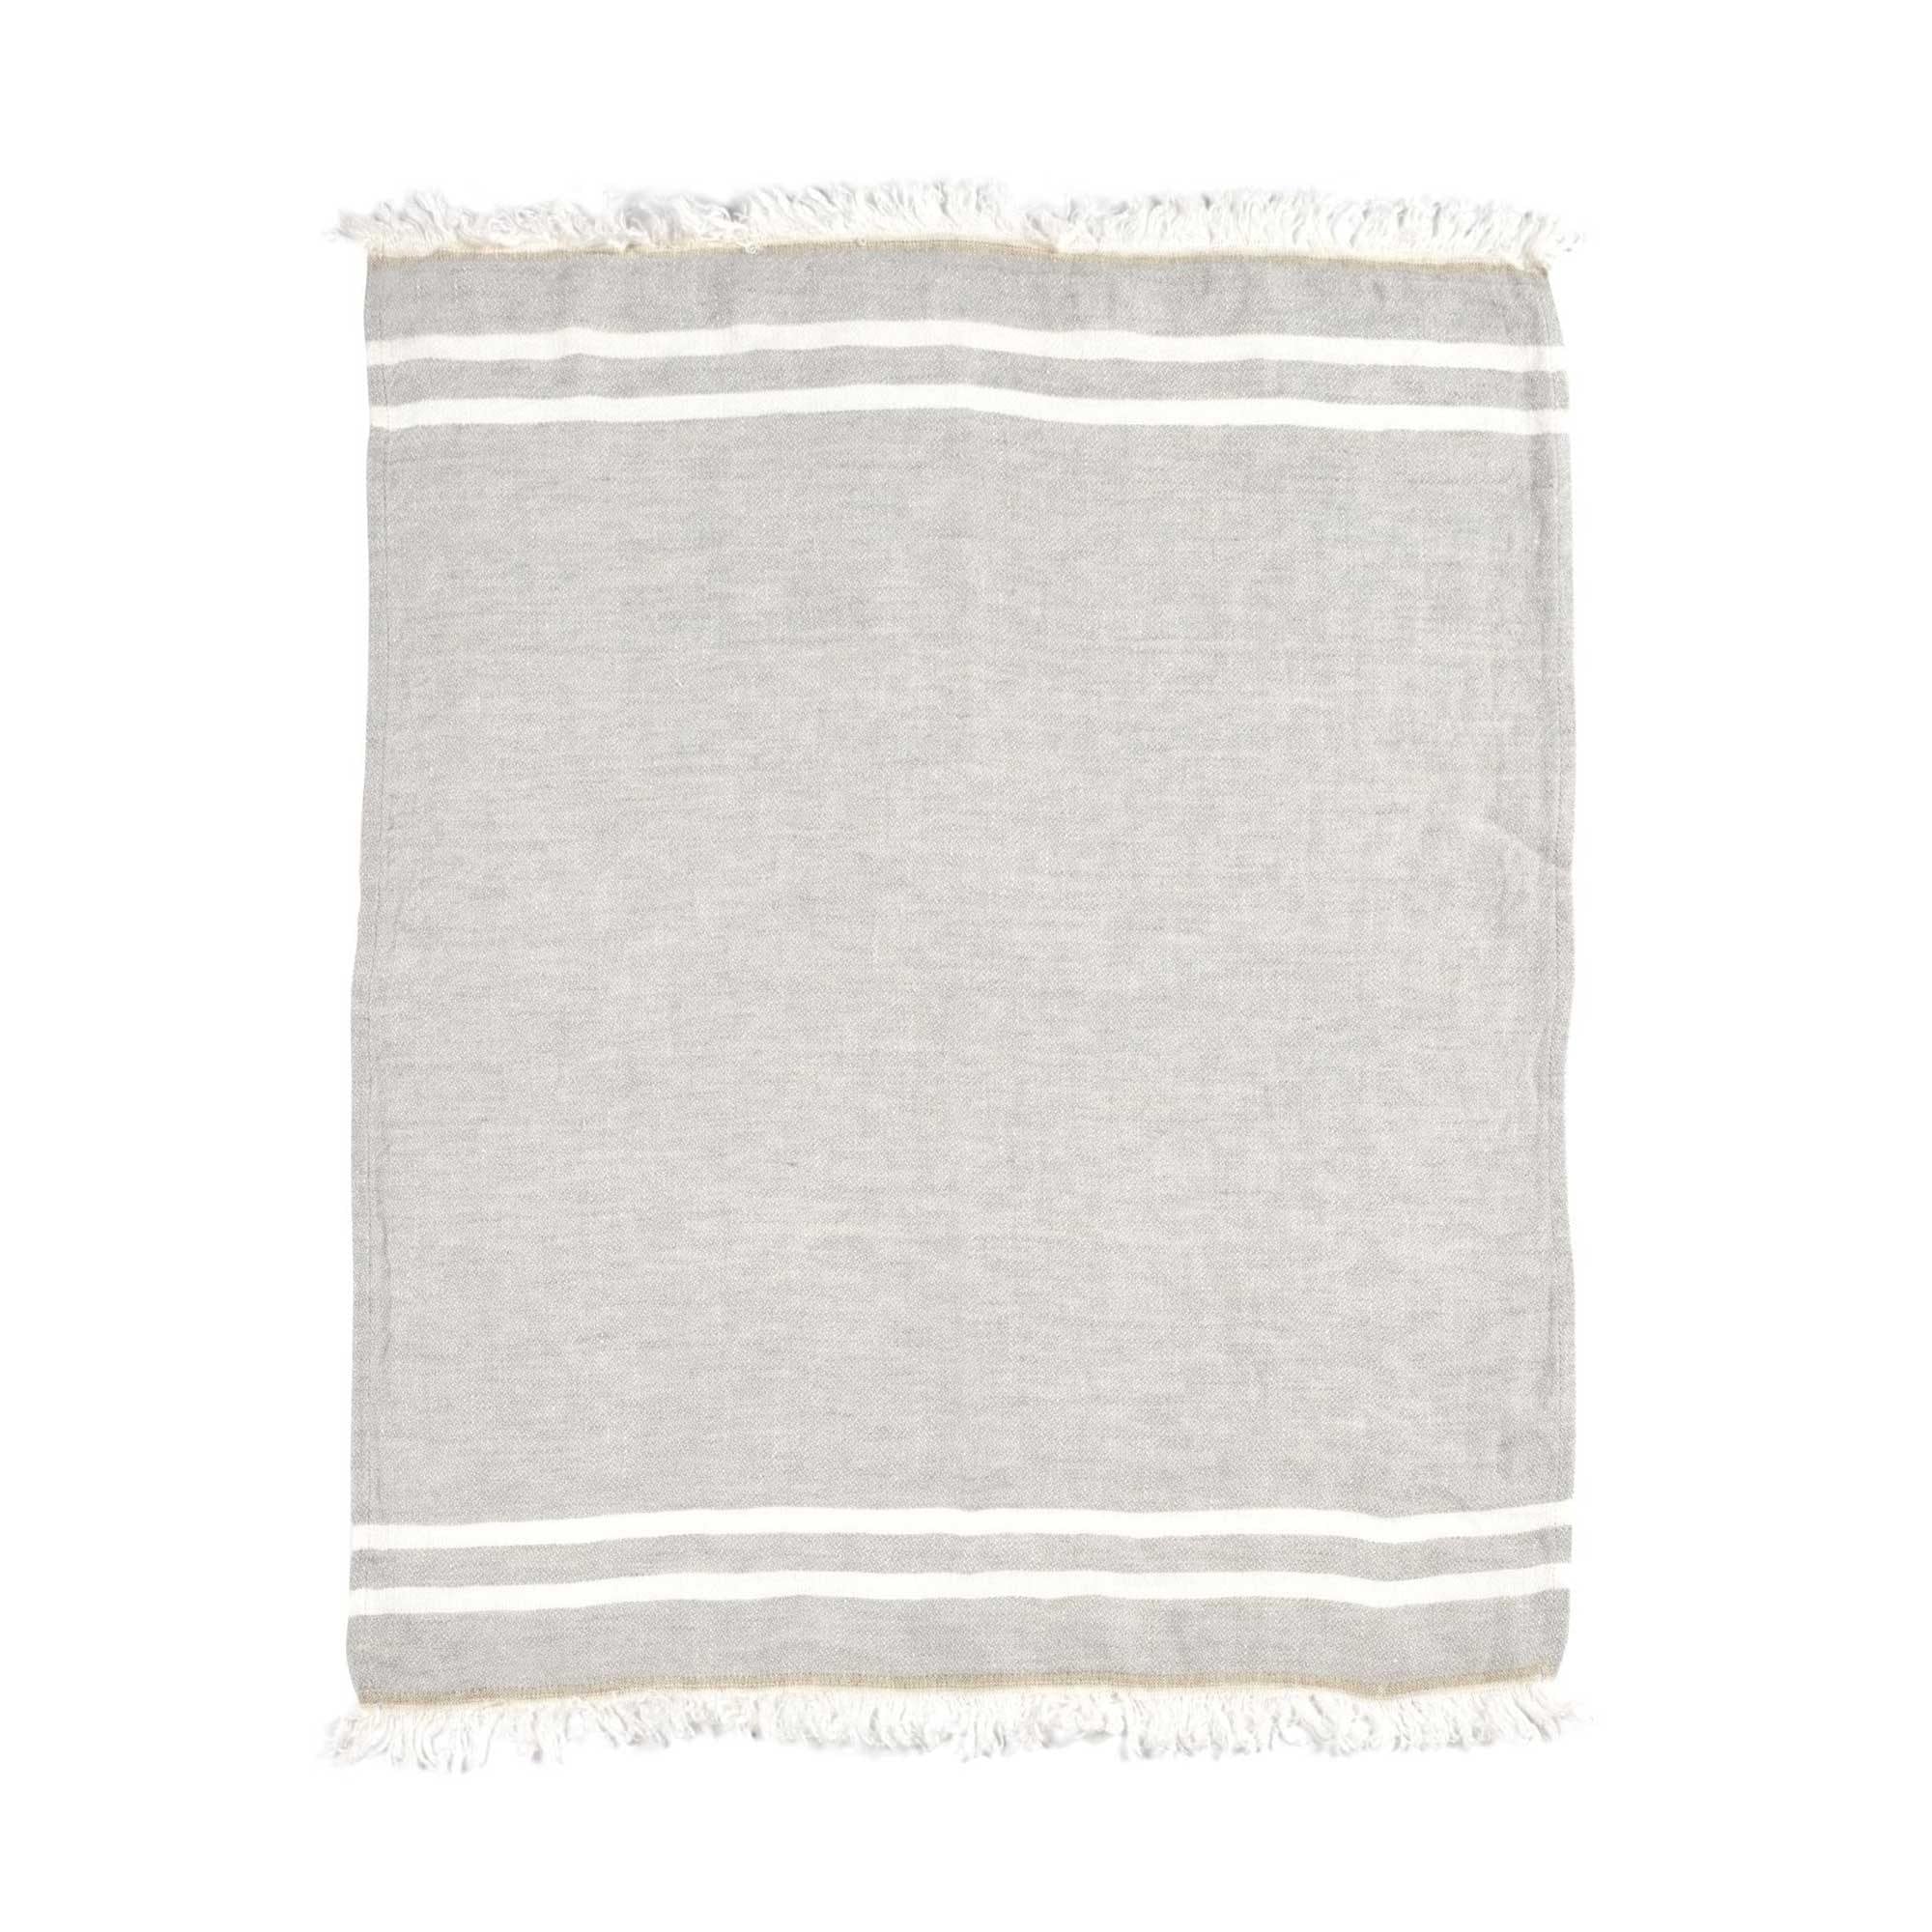 Belgian linen fouta throw blanket flat lay product shot in color Gray by Libeco for South Hous.